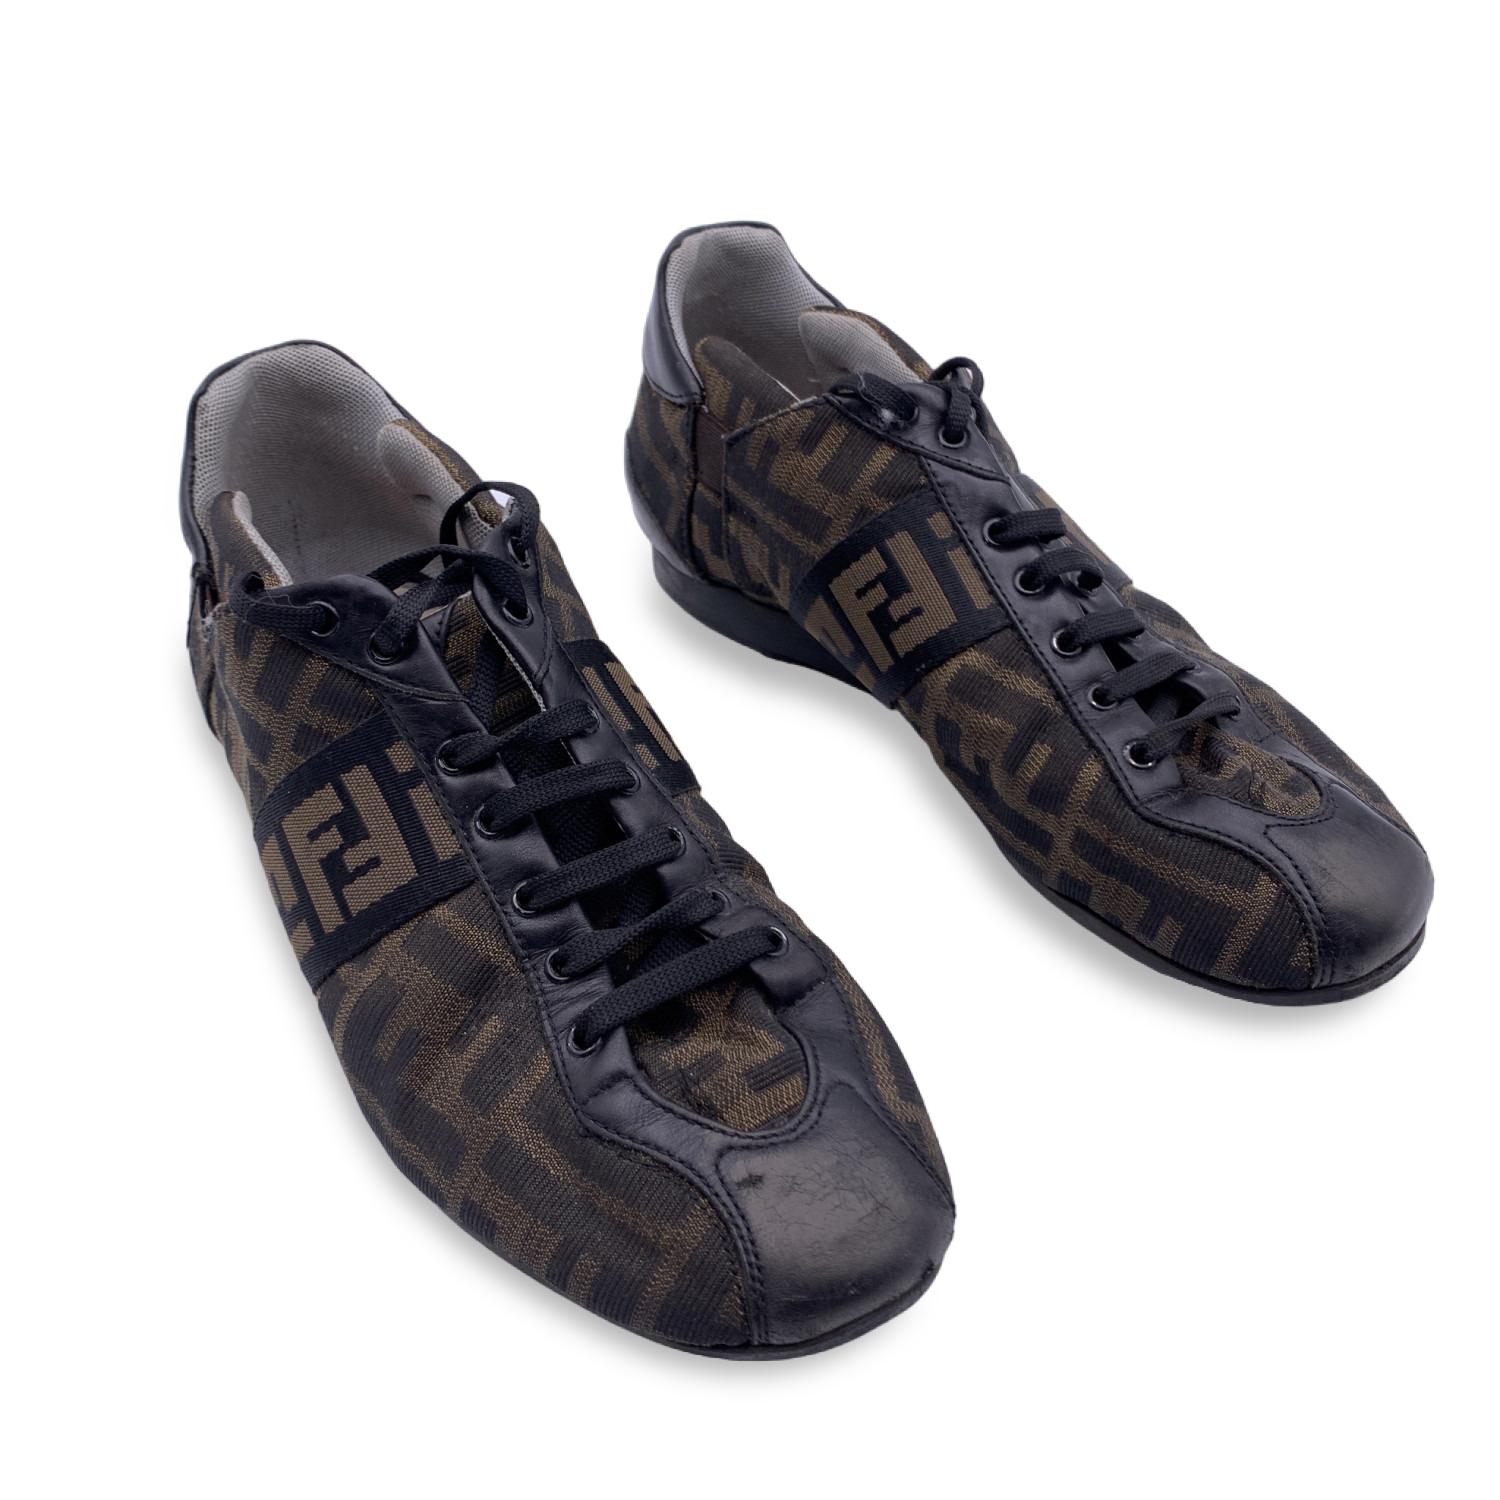 Fendi Tobacco Zucca Monogram Sneakers.  Zucca printed canvas with black leather trim. Lace up fronts and rounded toes. The insoles are lined with fabric. Rubber outsoles. Size 37

B - VERY GOOD
Some scratches on leather trim. Some wrinkles on the